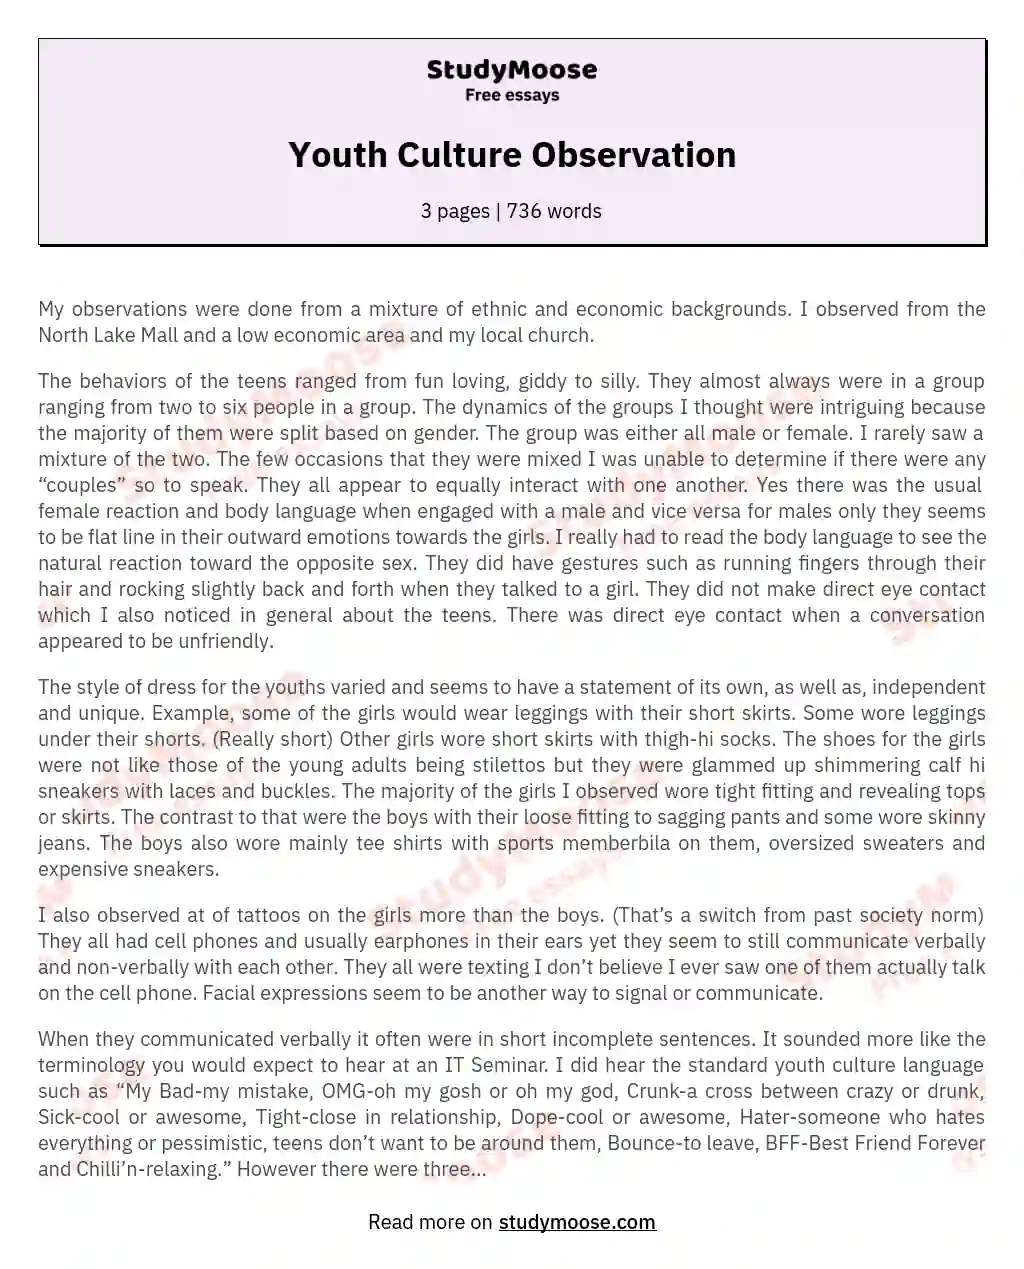 Youth Culture Observation essay